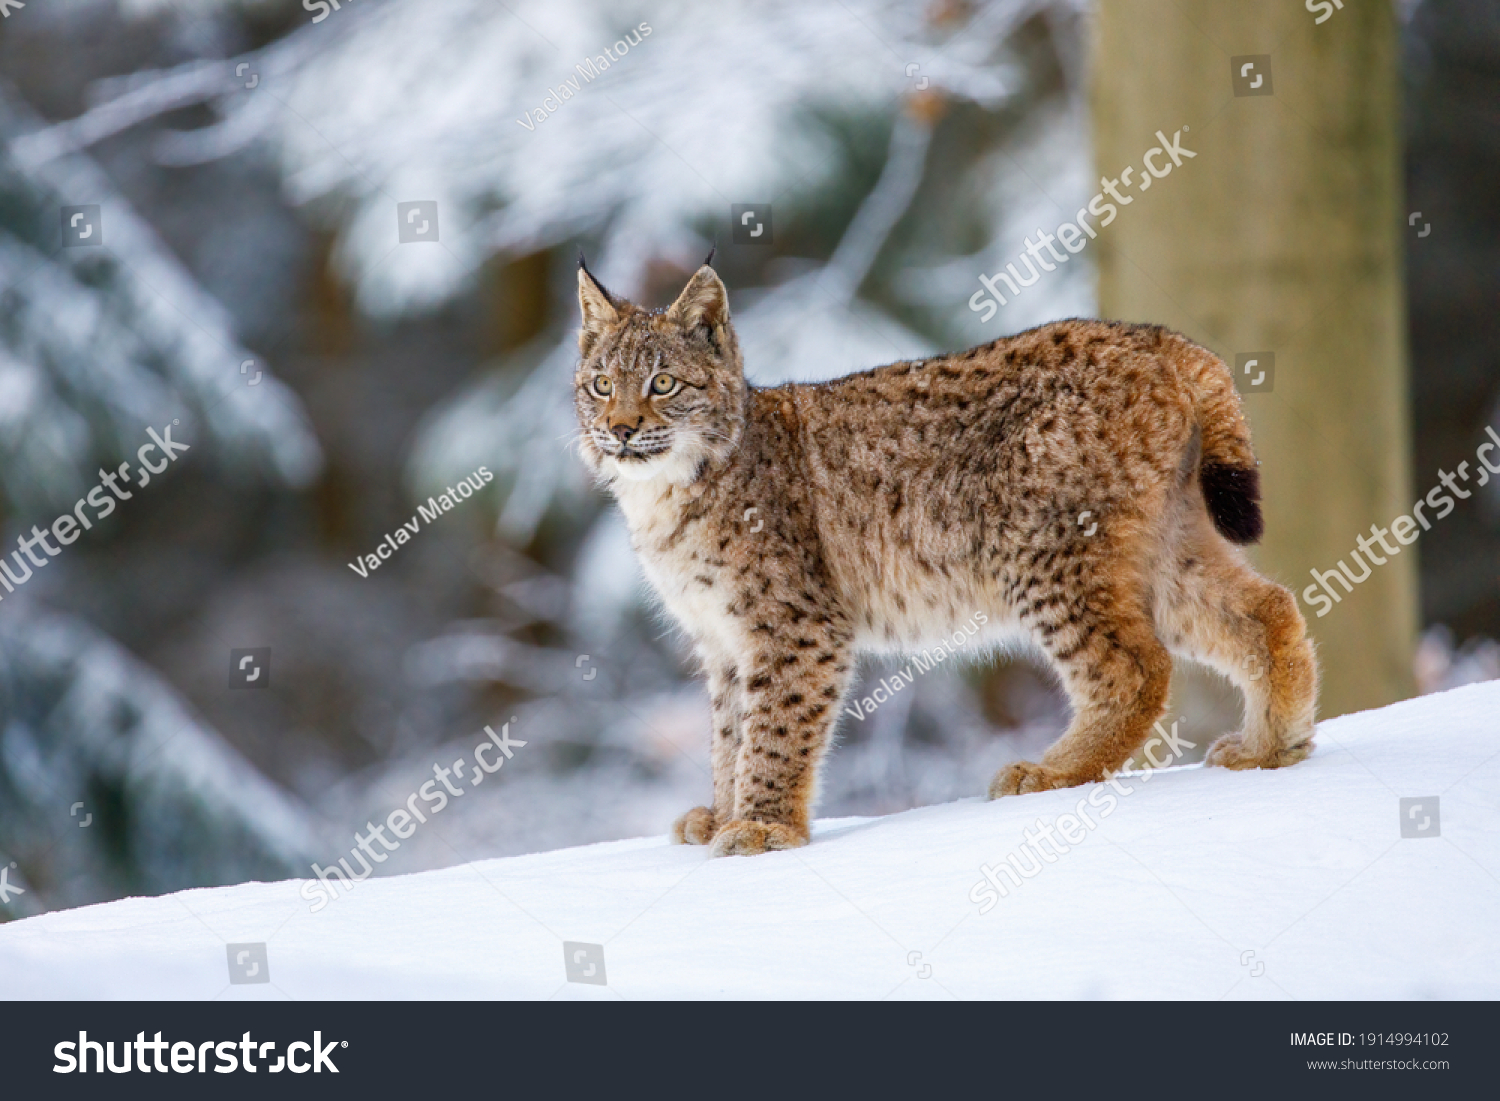 Lynx in winter. Young Eurasian lynx, Lynx lynx, walks in snowy beech forest. Beautiful wild cat in nature. Cute animal with spotted orange fur. Beast of prey in frosty day. Predator in nature habitat. #1914994102